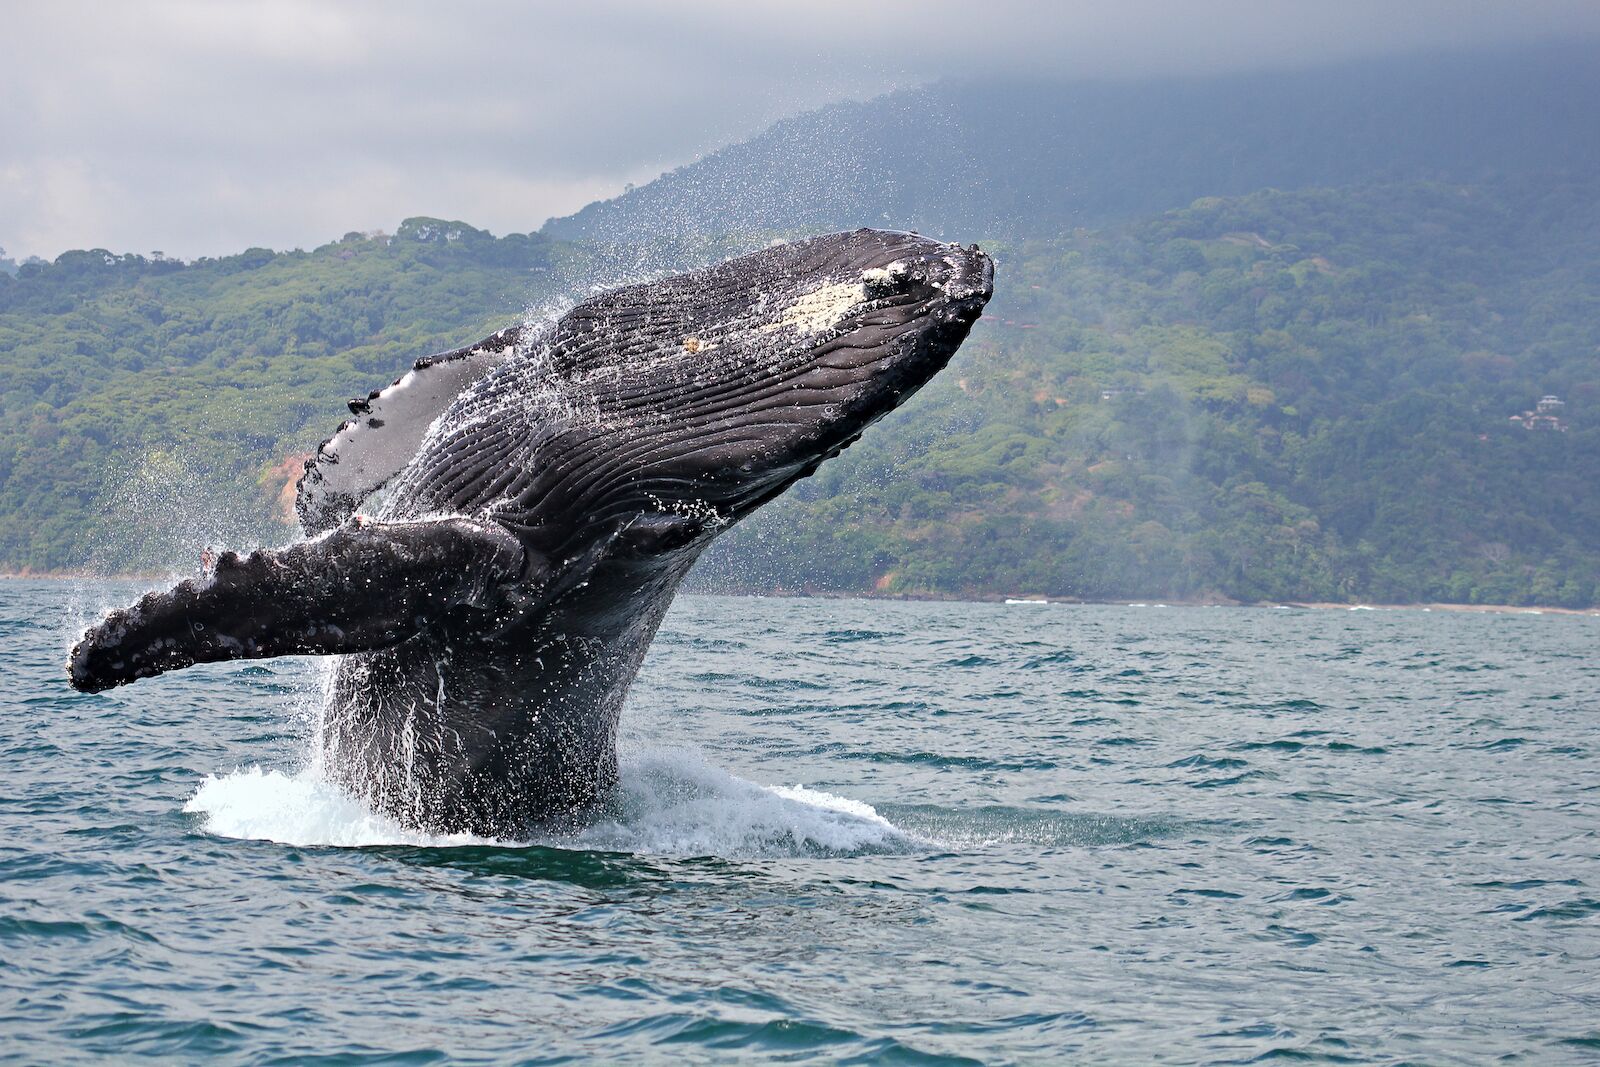 Whale in the water in Costa Rica. Read on to know when is the best time to visit Costa Rica and see wildlife